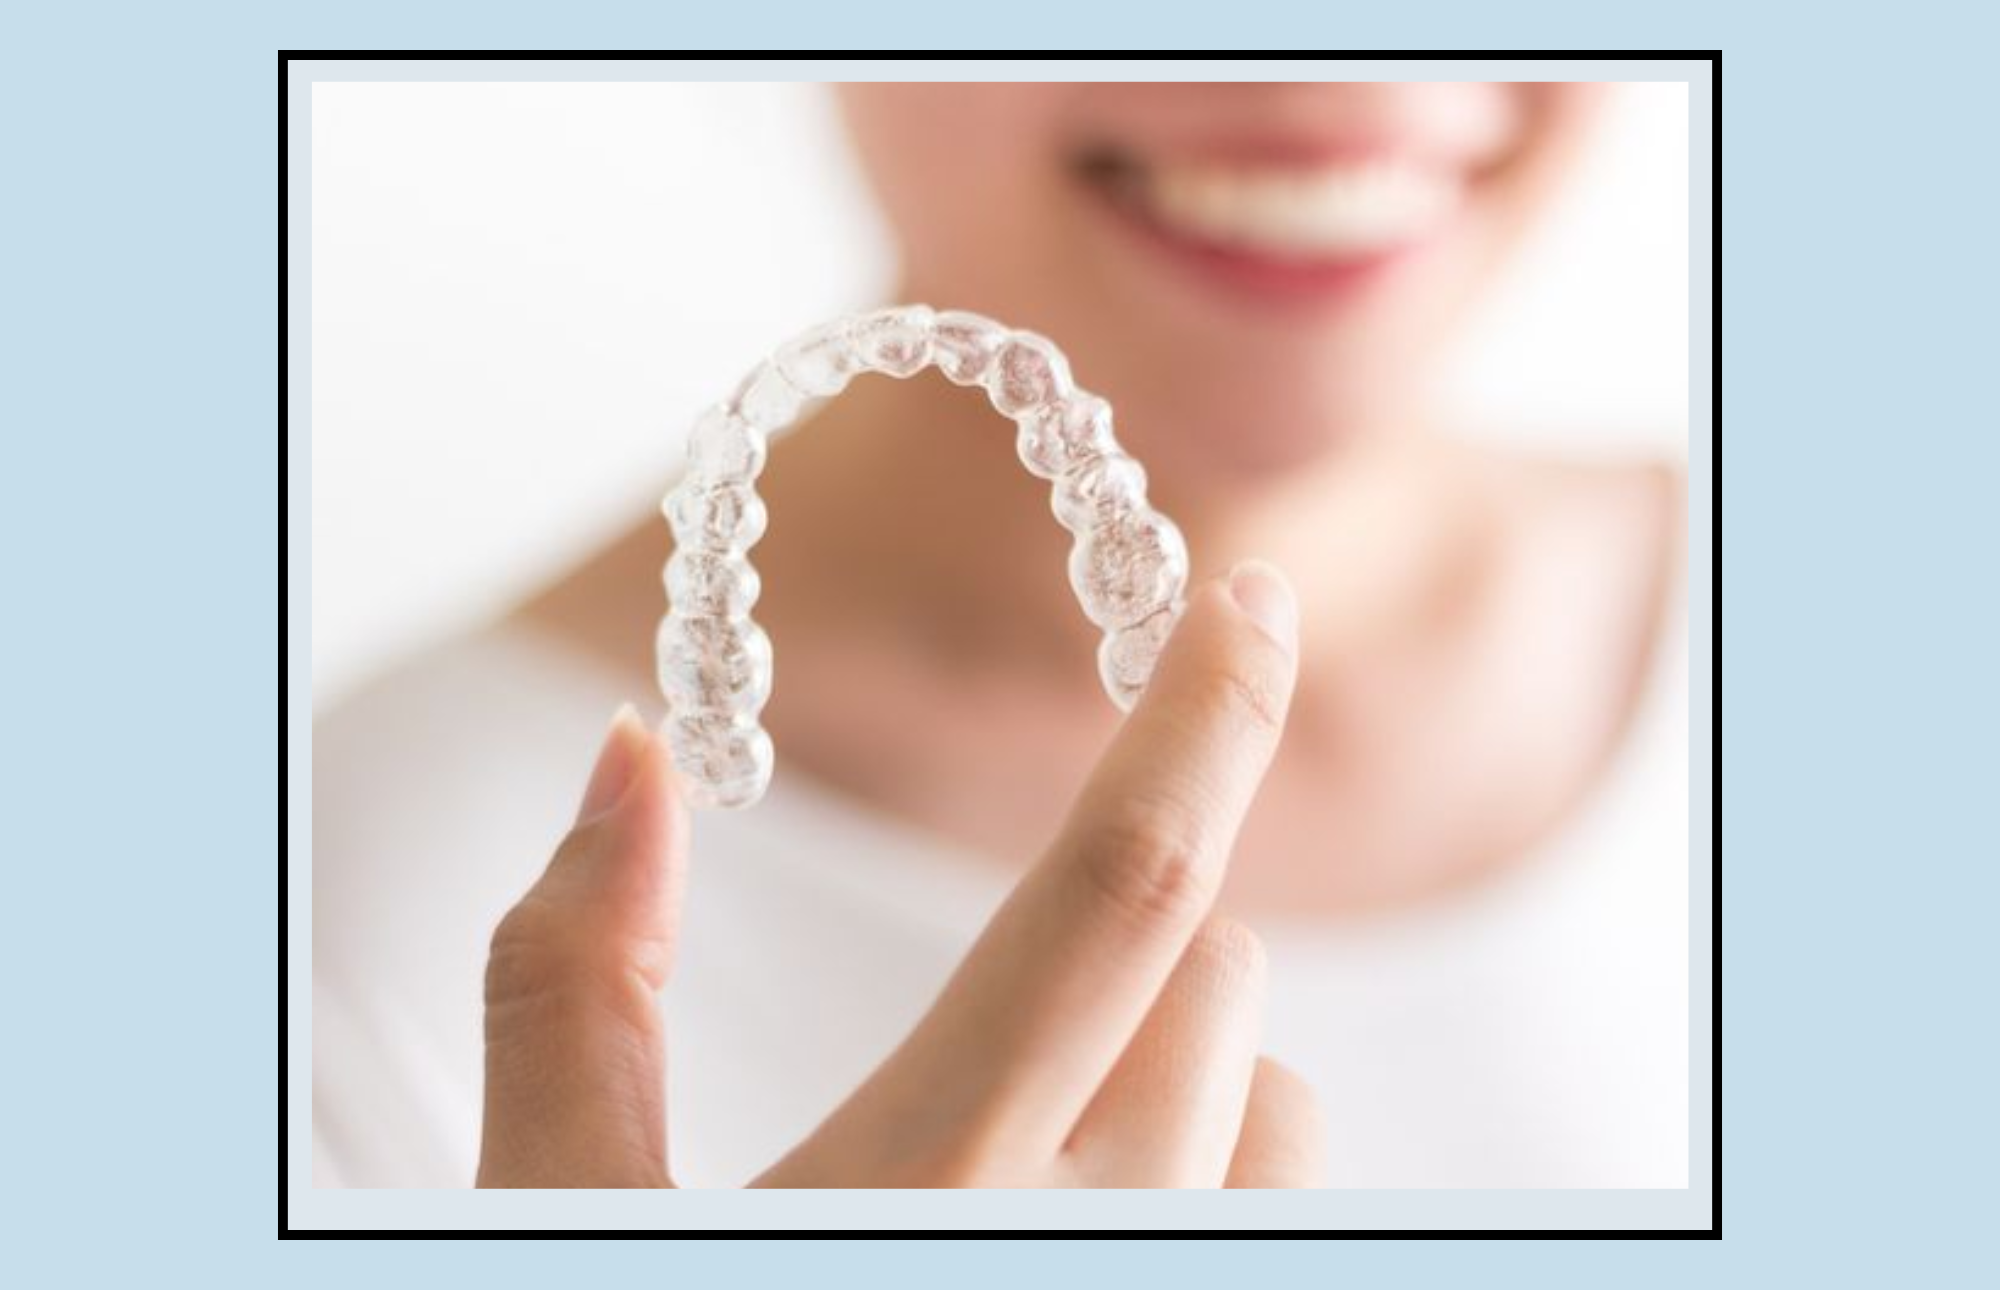 Invisalign How Long Does It Take